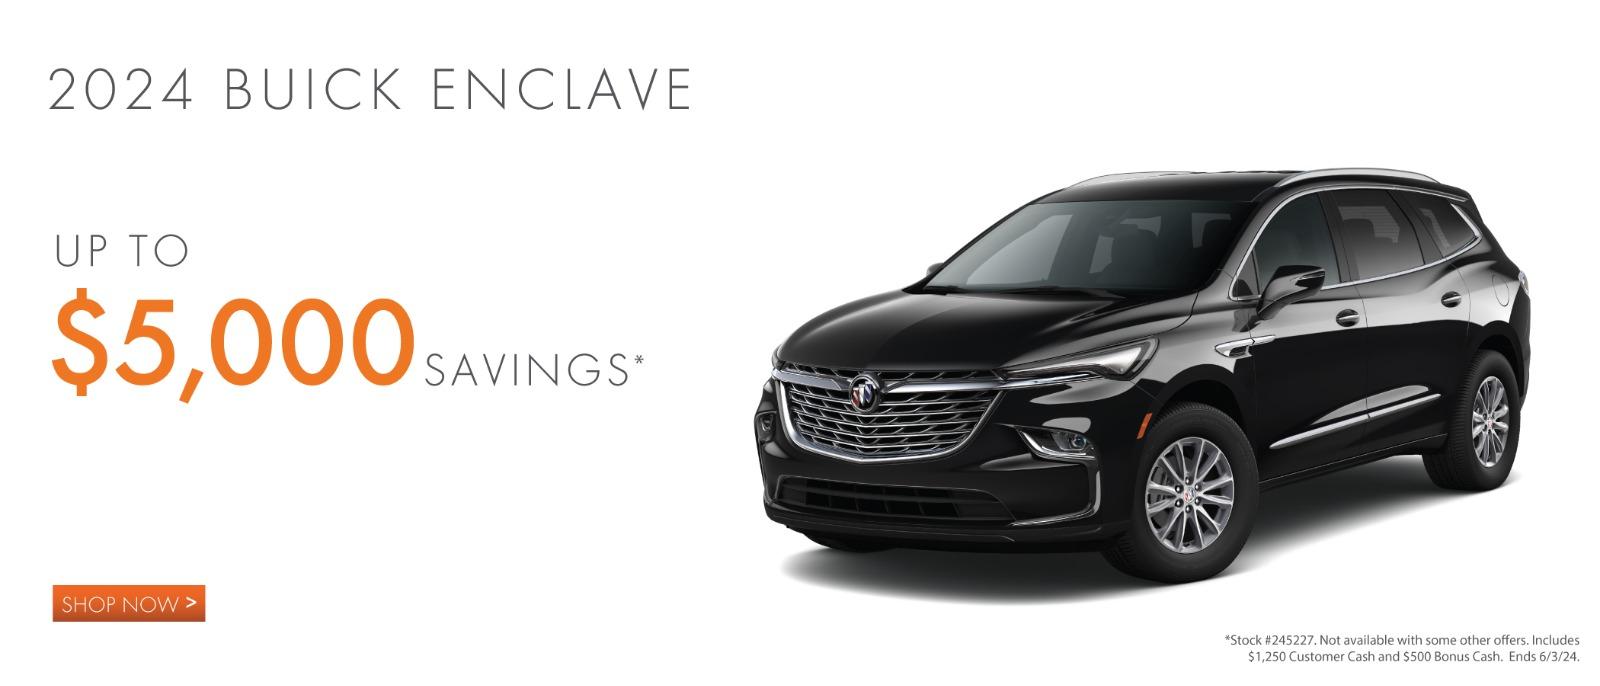 2024 Buick Enclave up to $5,000 Savings